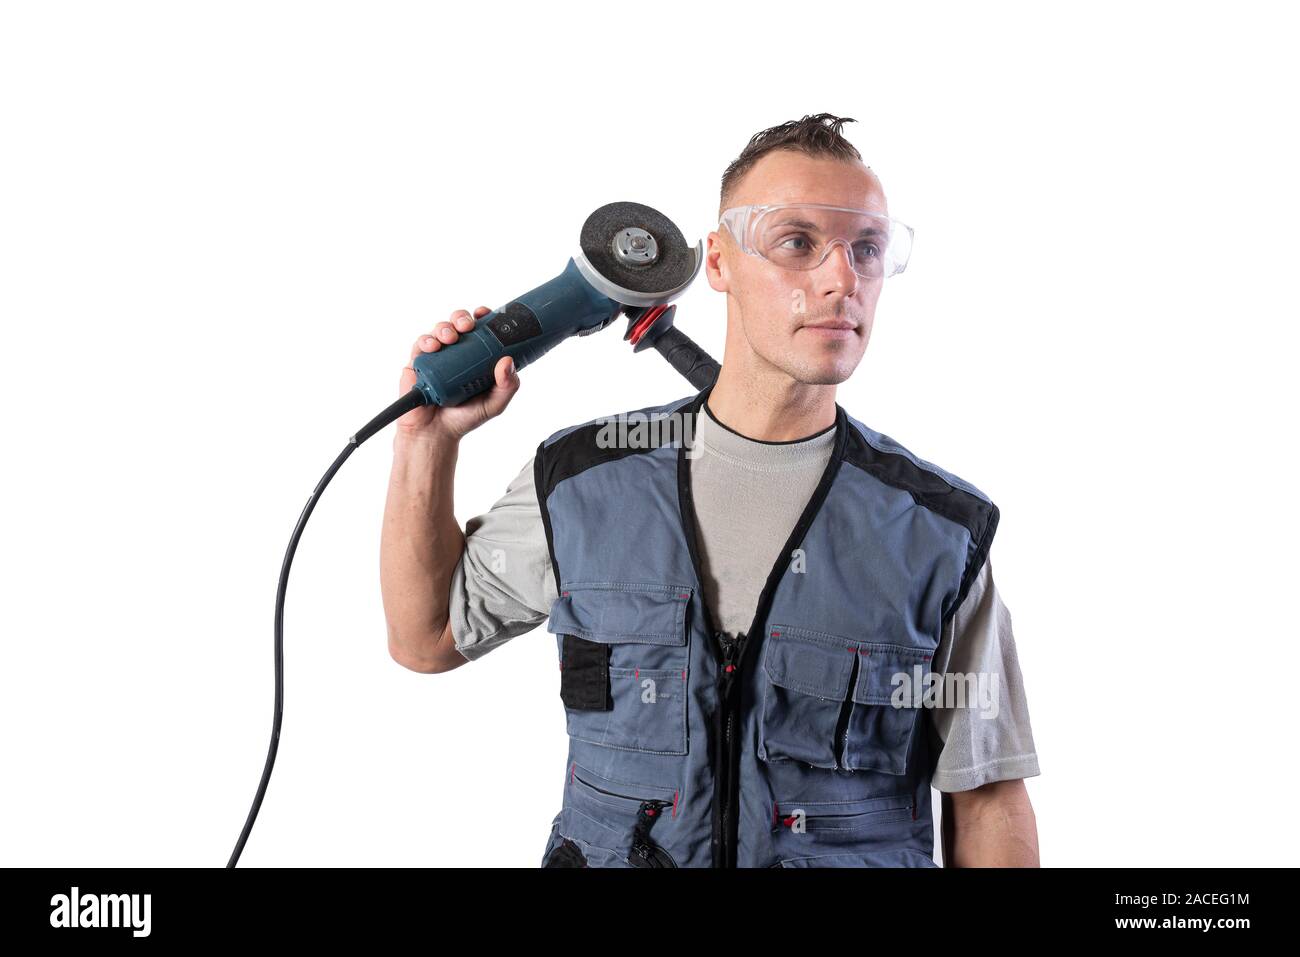 Builder in safety glasses with angle grinder on his shoulder. Stock Photo